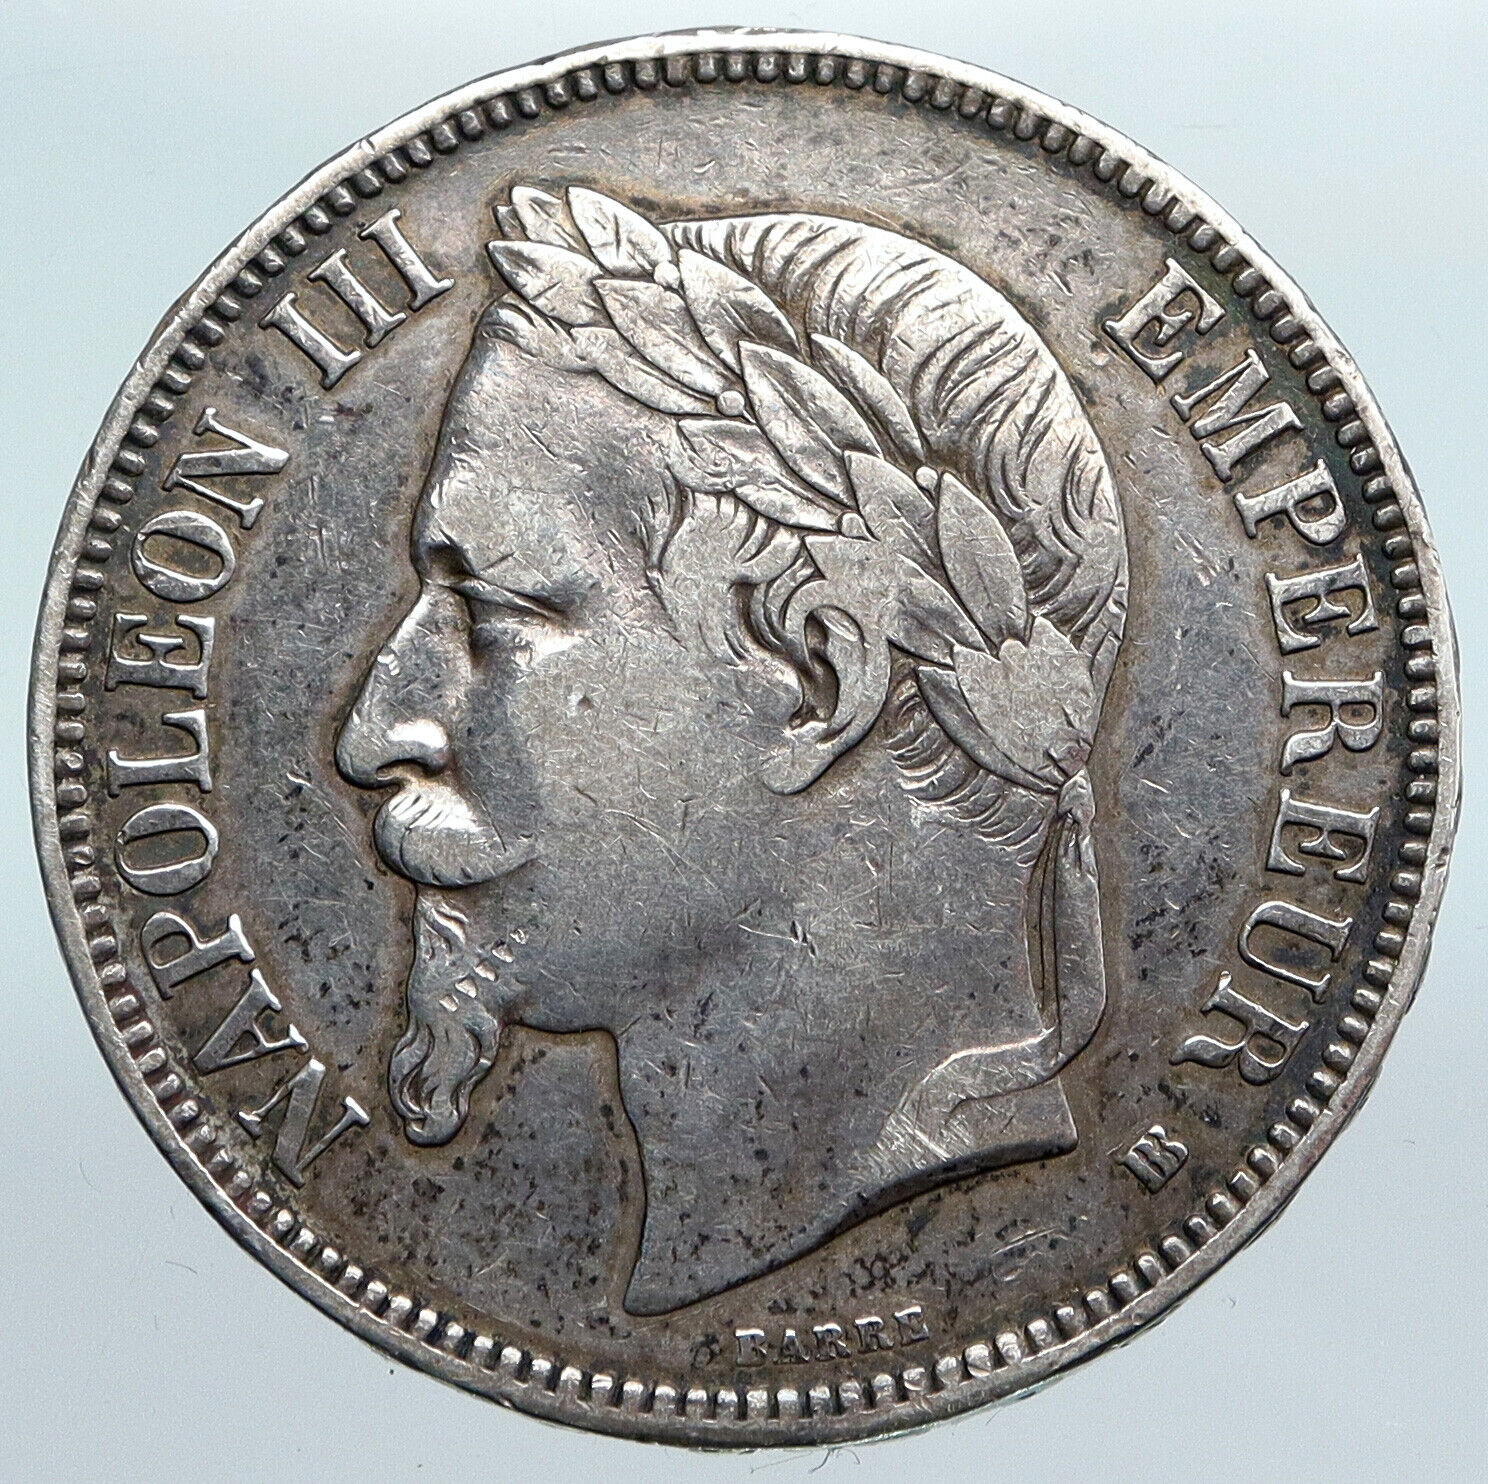 1868 FRANCE Emperor NAPOLEON III Crowned ARMS Silver 5 Francs French Coin i90019